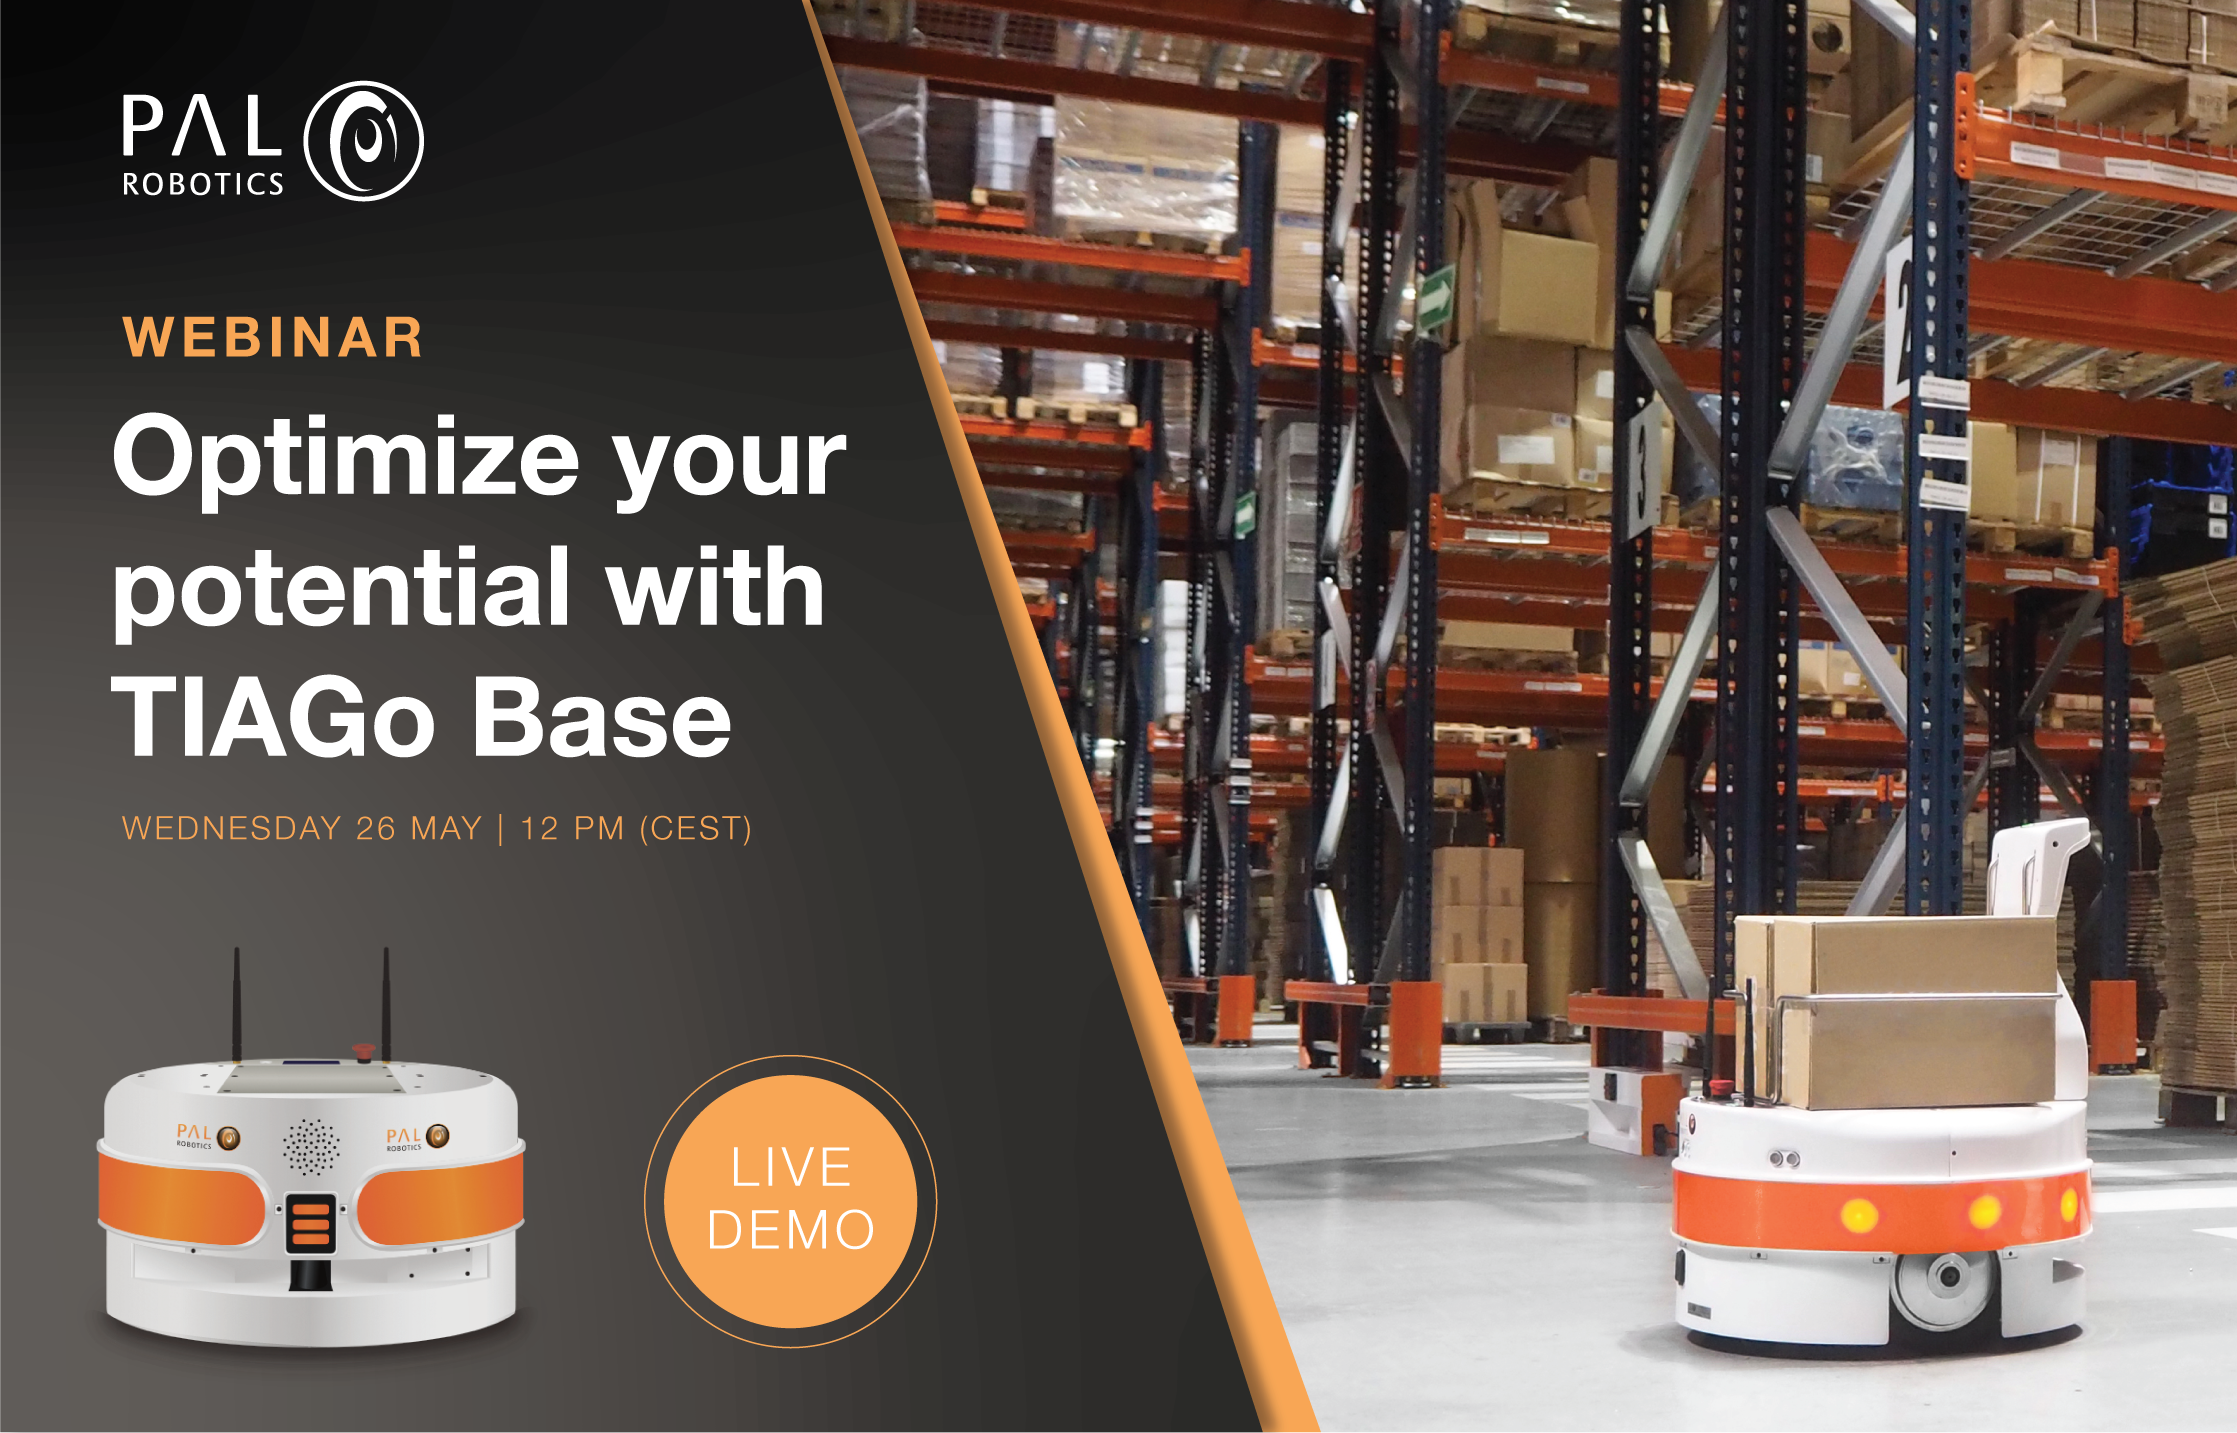 Optimize your potential with TIAGo Base webinar by PAL Robotics on autonomous mobile robots (AMR), intralogistics, and industry 4.0